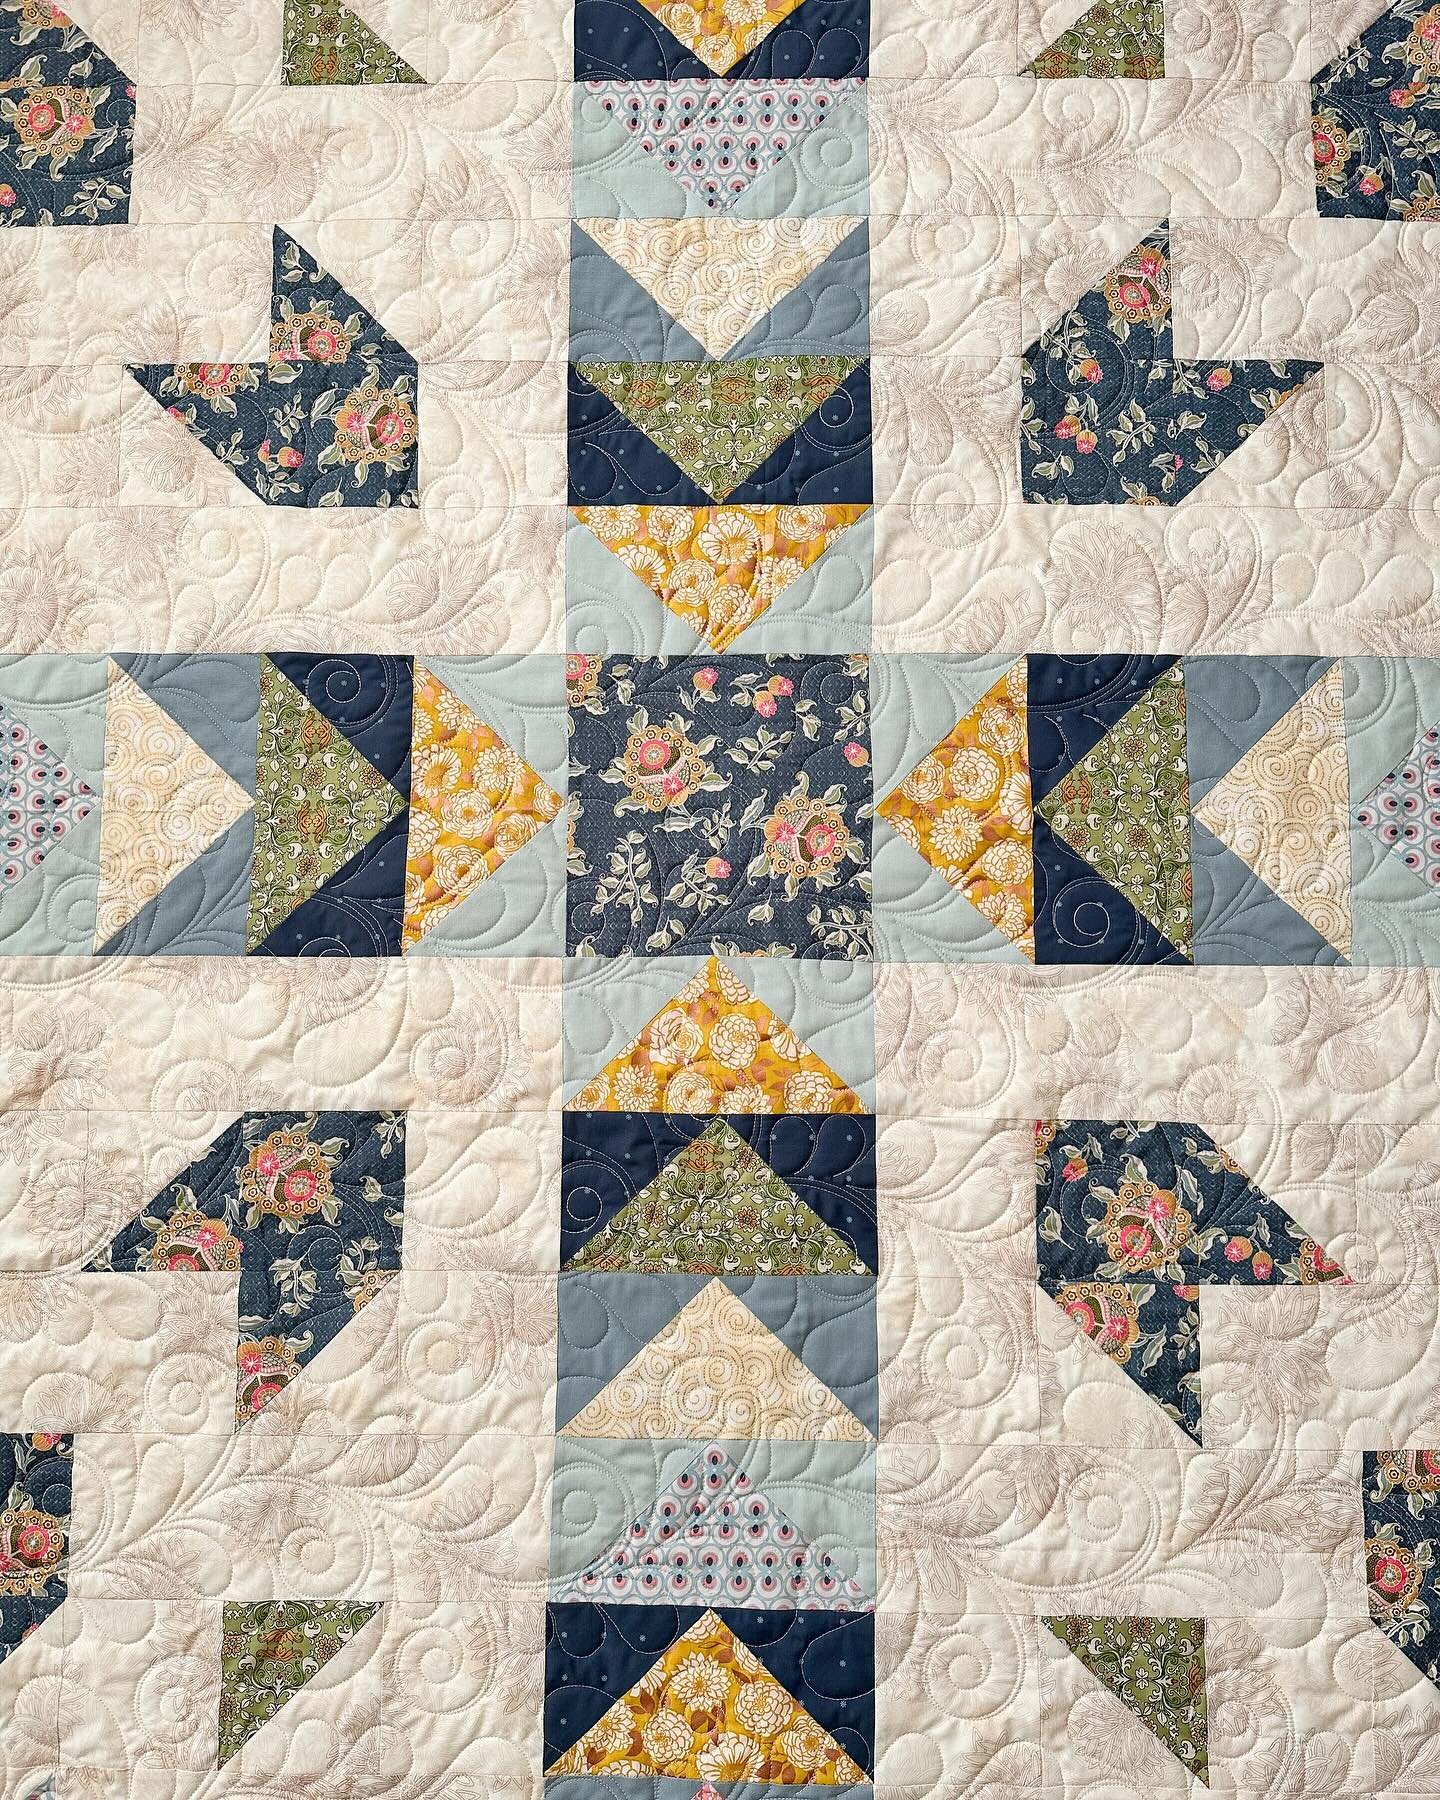 I love how all the details come together on a quilt.  I also love the variety of options we have to choose from in each step of the process.  My clients have excellent taste when it comes to the quilting designs we choose.  Sometimes we struggle to c